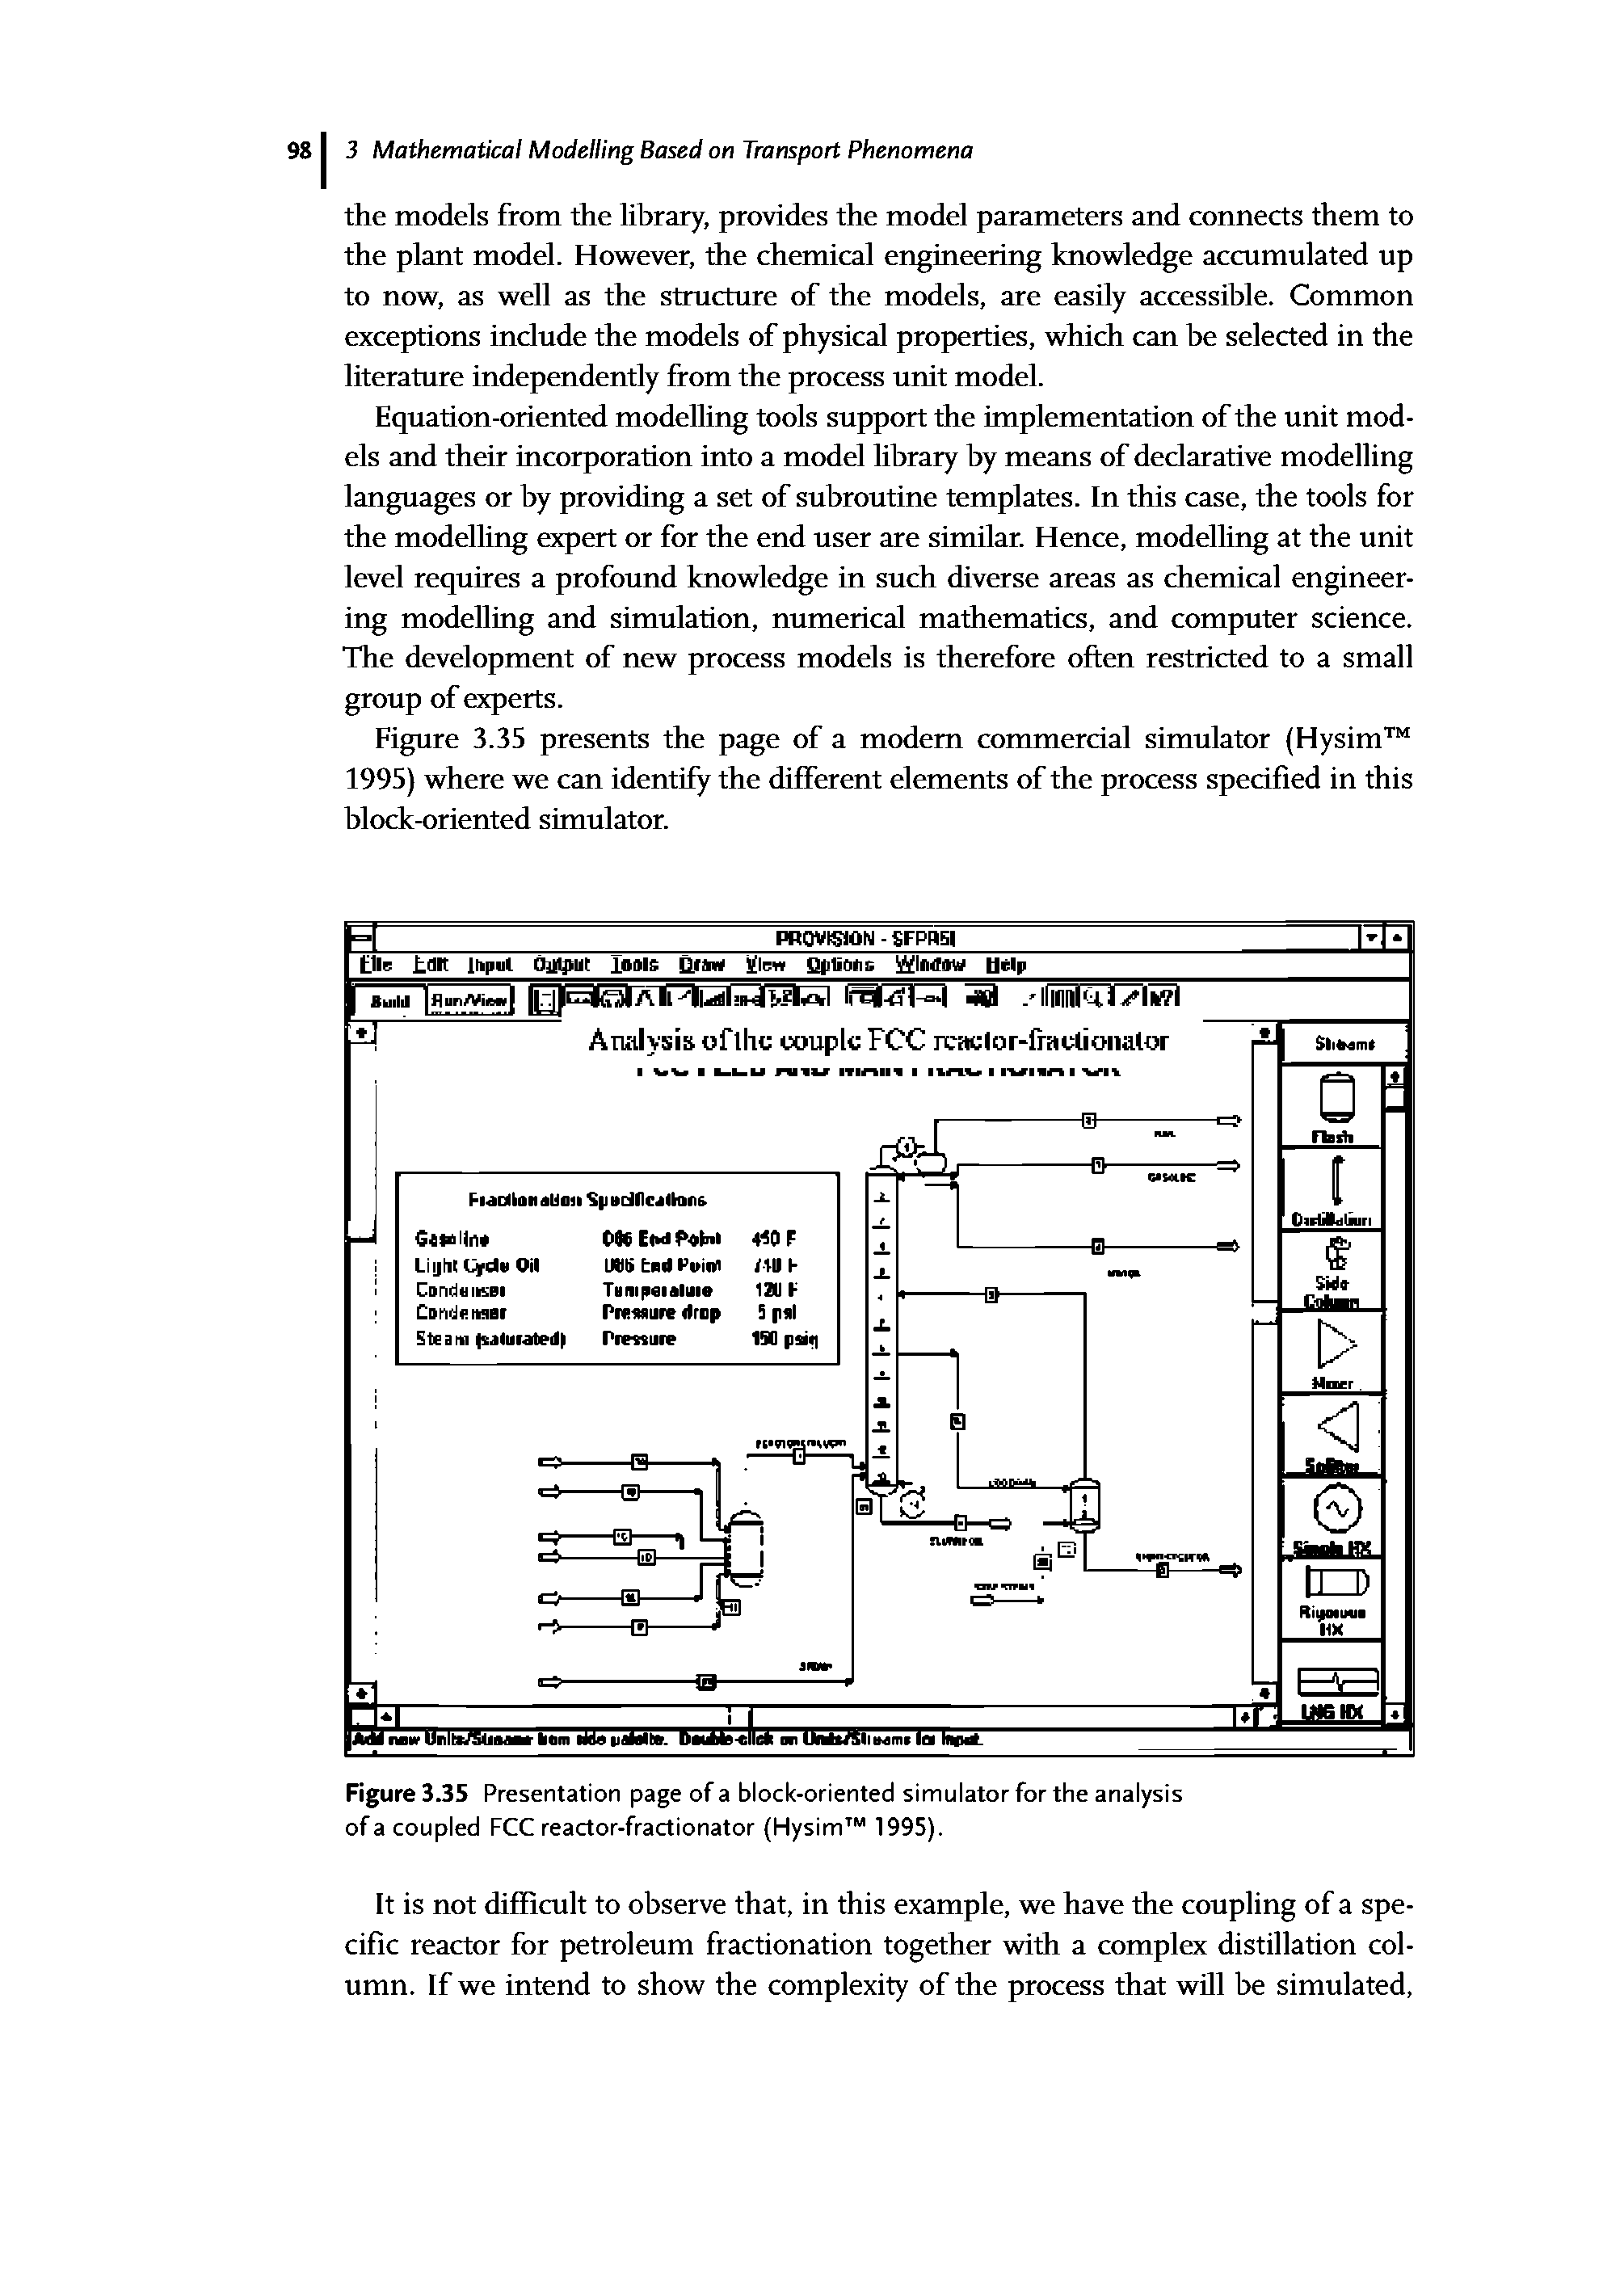 Figure 3.35 Presentation page of a block-oriented simulator for the analysis of a coupled FCC reactor-fractionator (Hysim 1995).